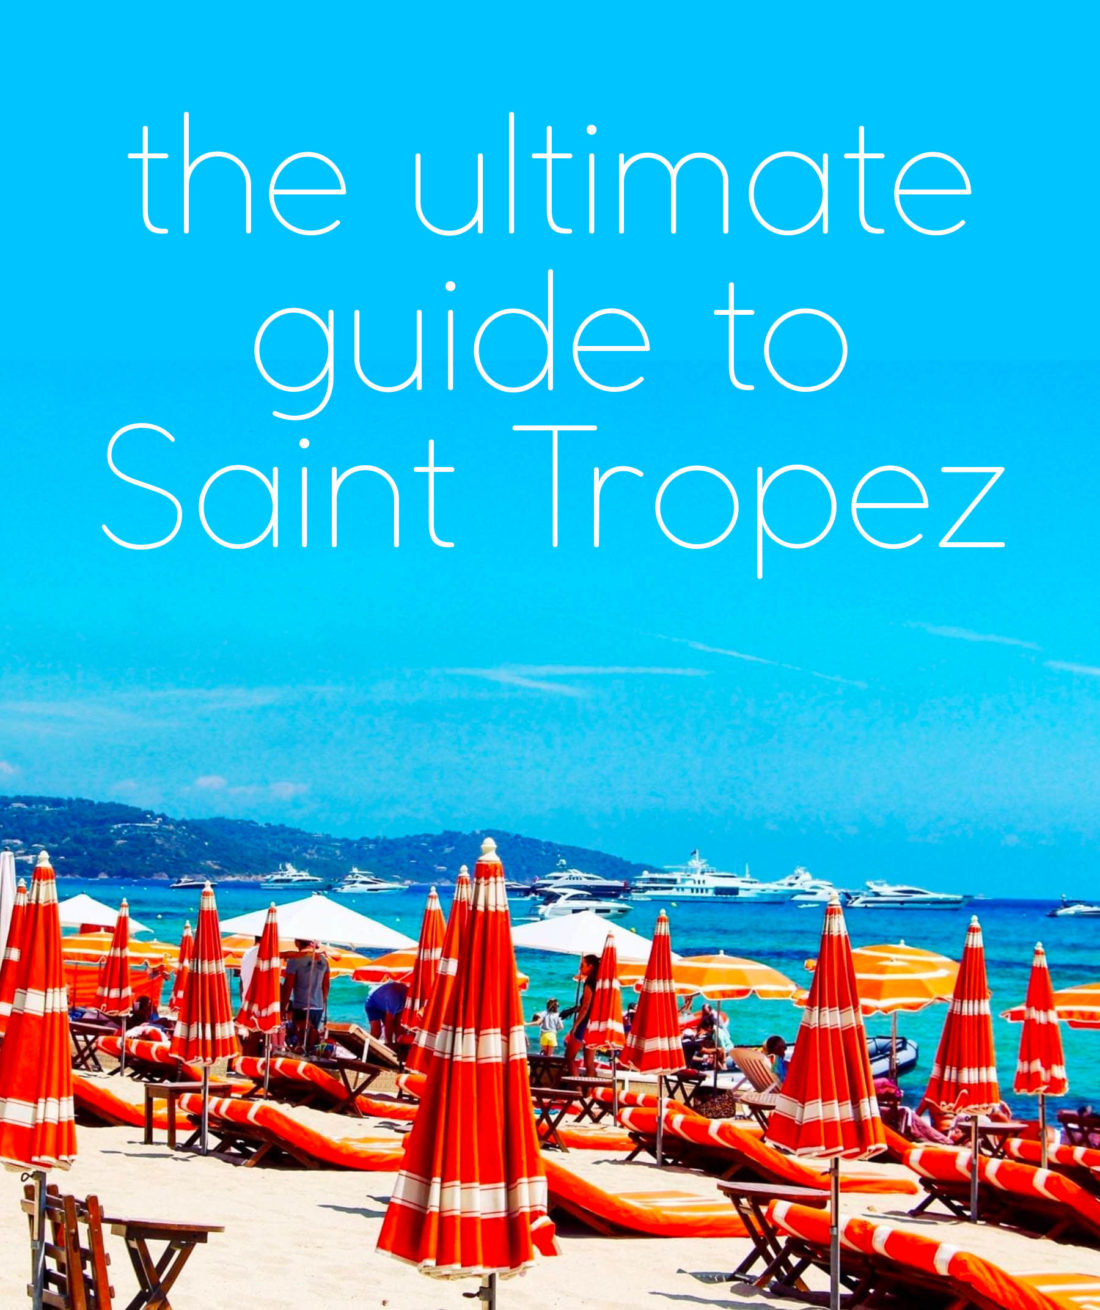 How to plan the perfect luxury holiday in St Tropez